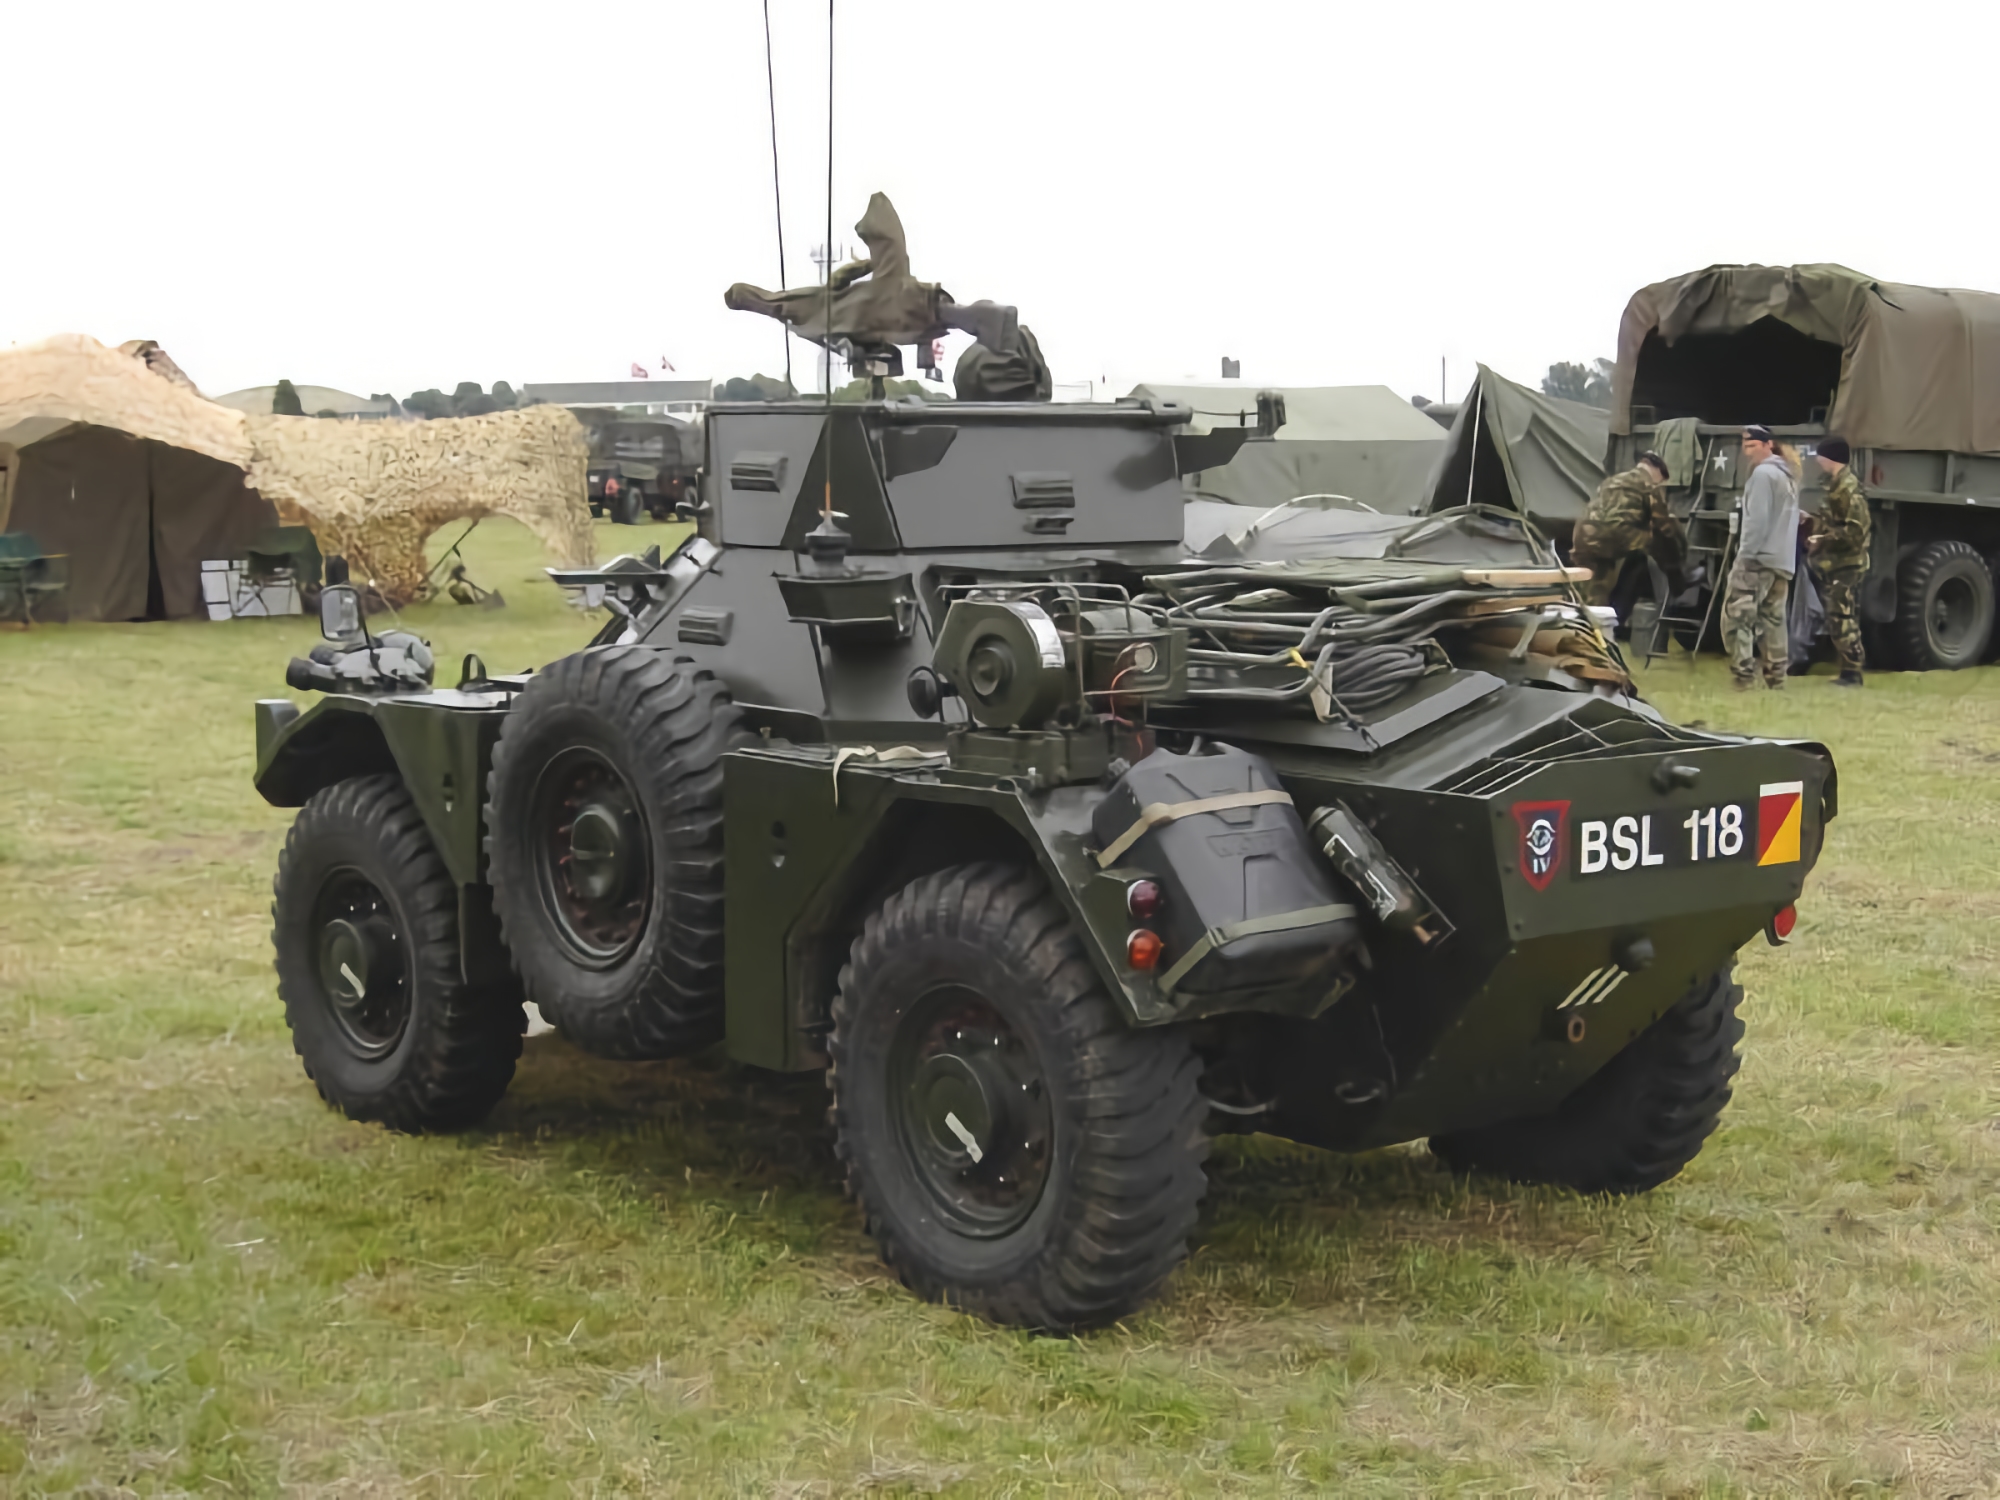 The AFU uses British Land Rover Snatch armored vehicles and Ferret Mk 1 reconnaissance vehicles at the front